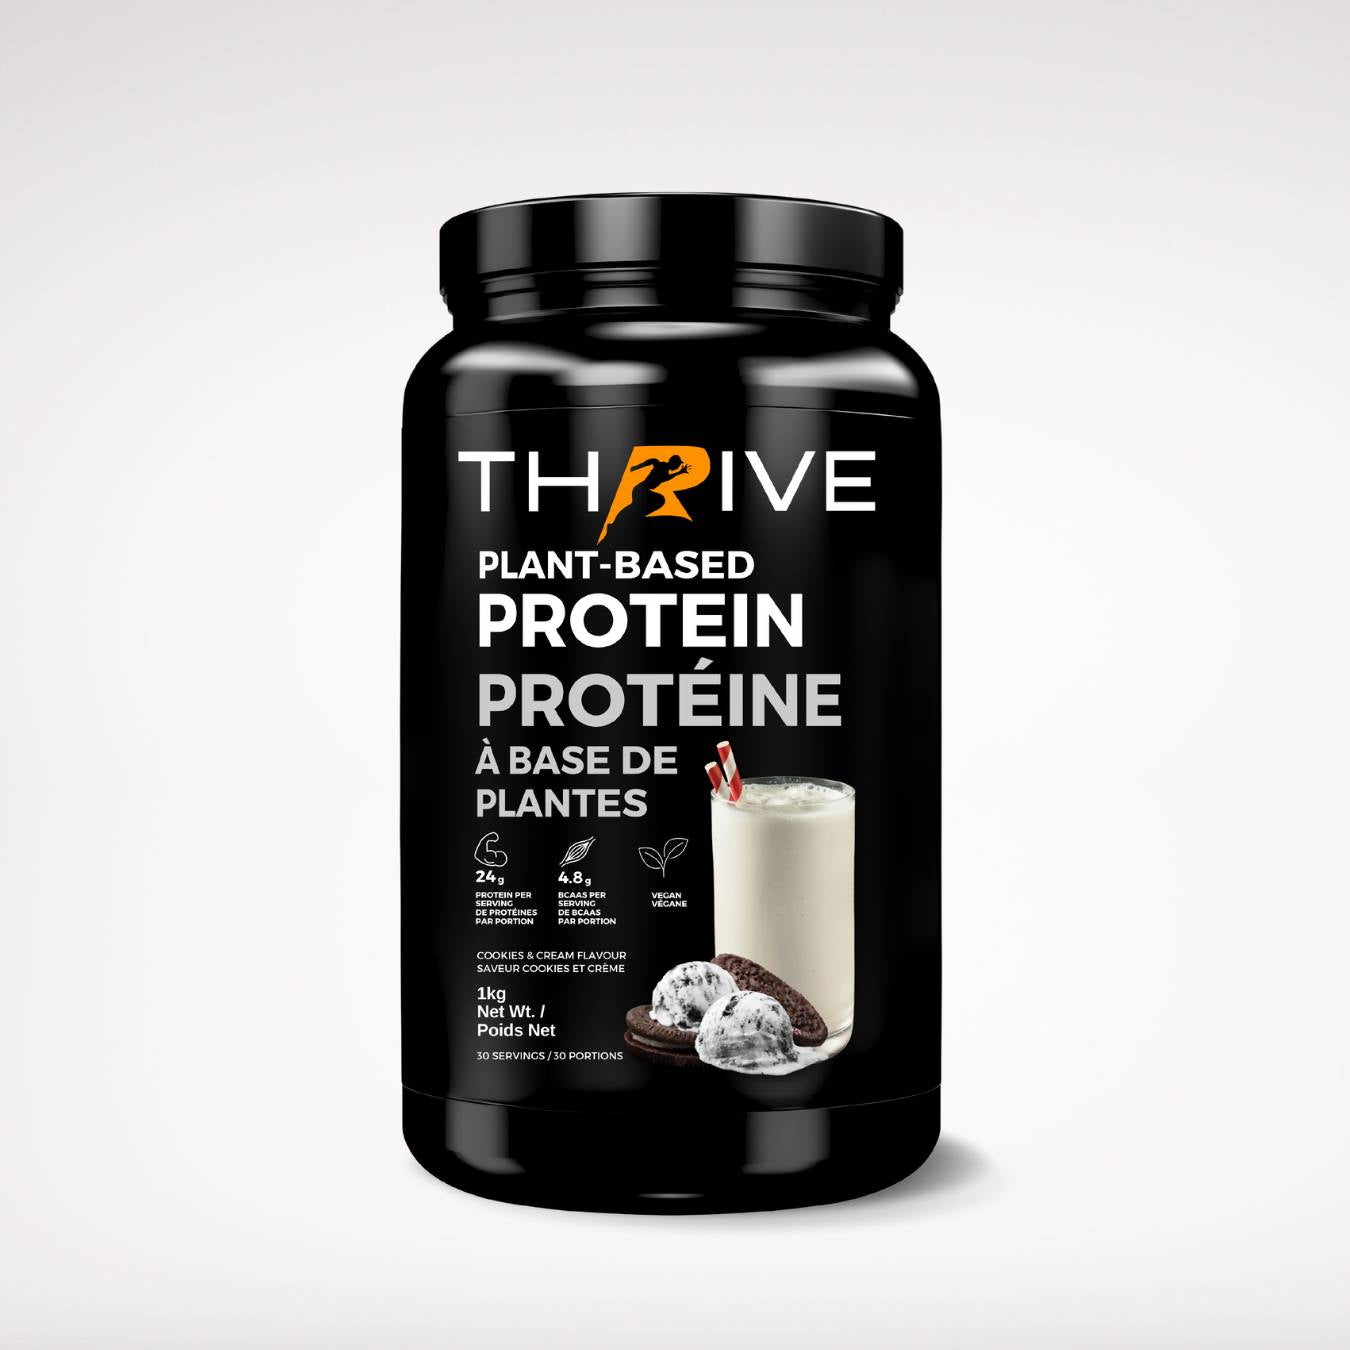 Thrive Plant-Based Protein Cookies & Cream (1 Unit)